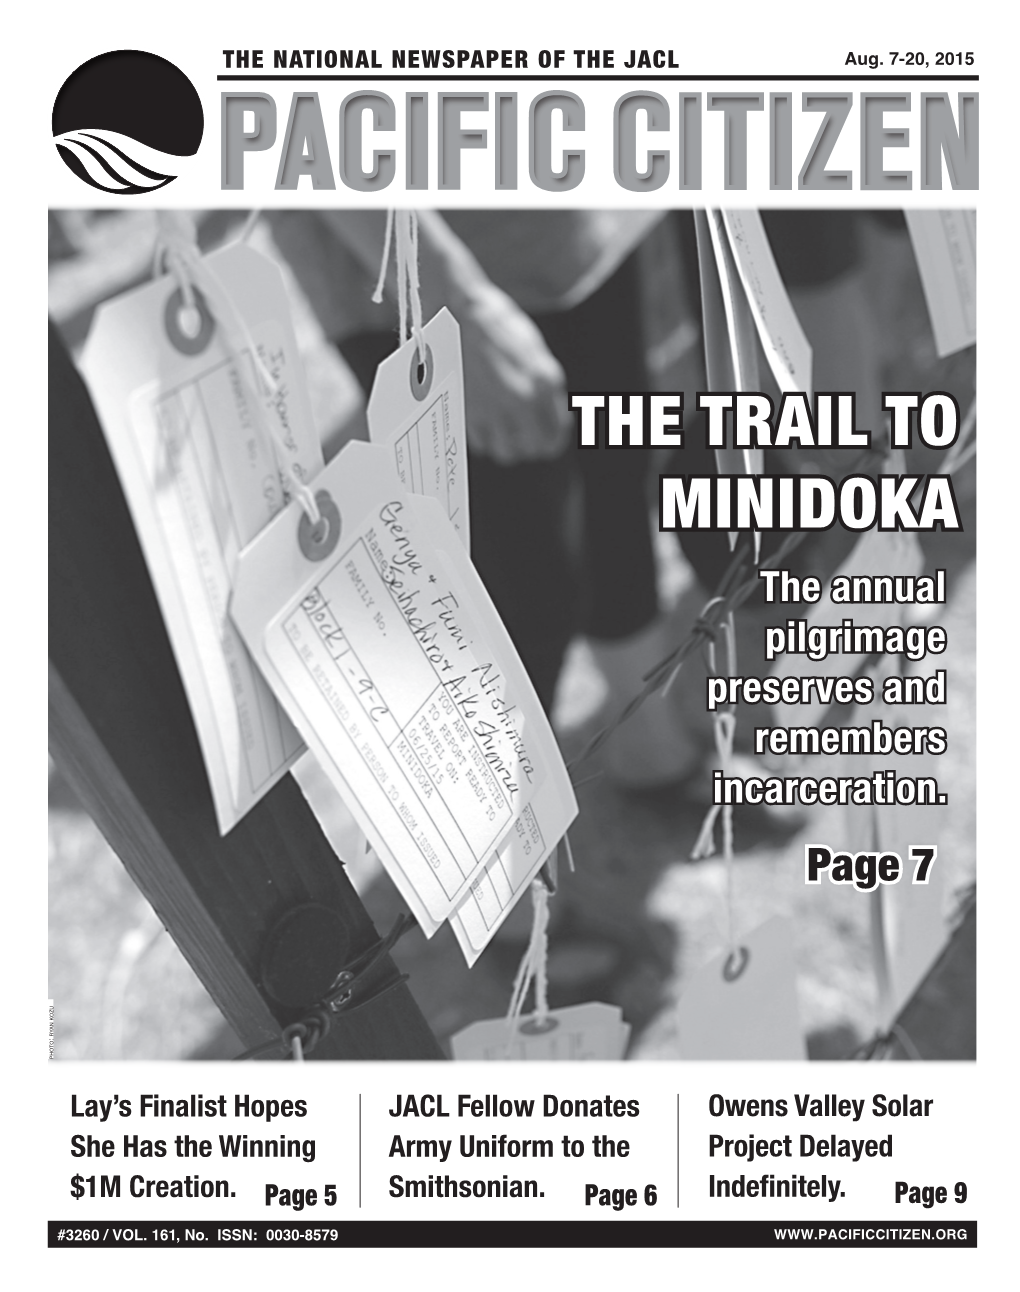 THE TRAIL to MINIDOKA the Annual Pilgrimage Preserves and Remembers Incarceration